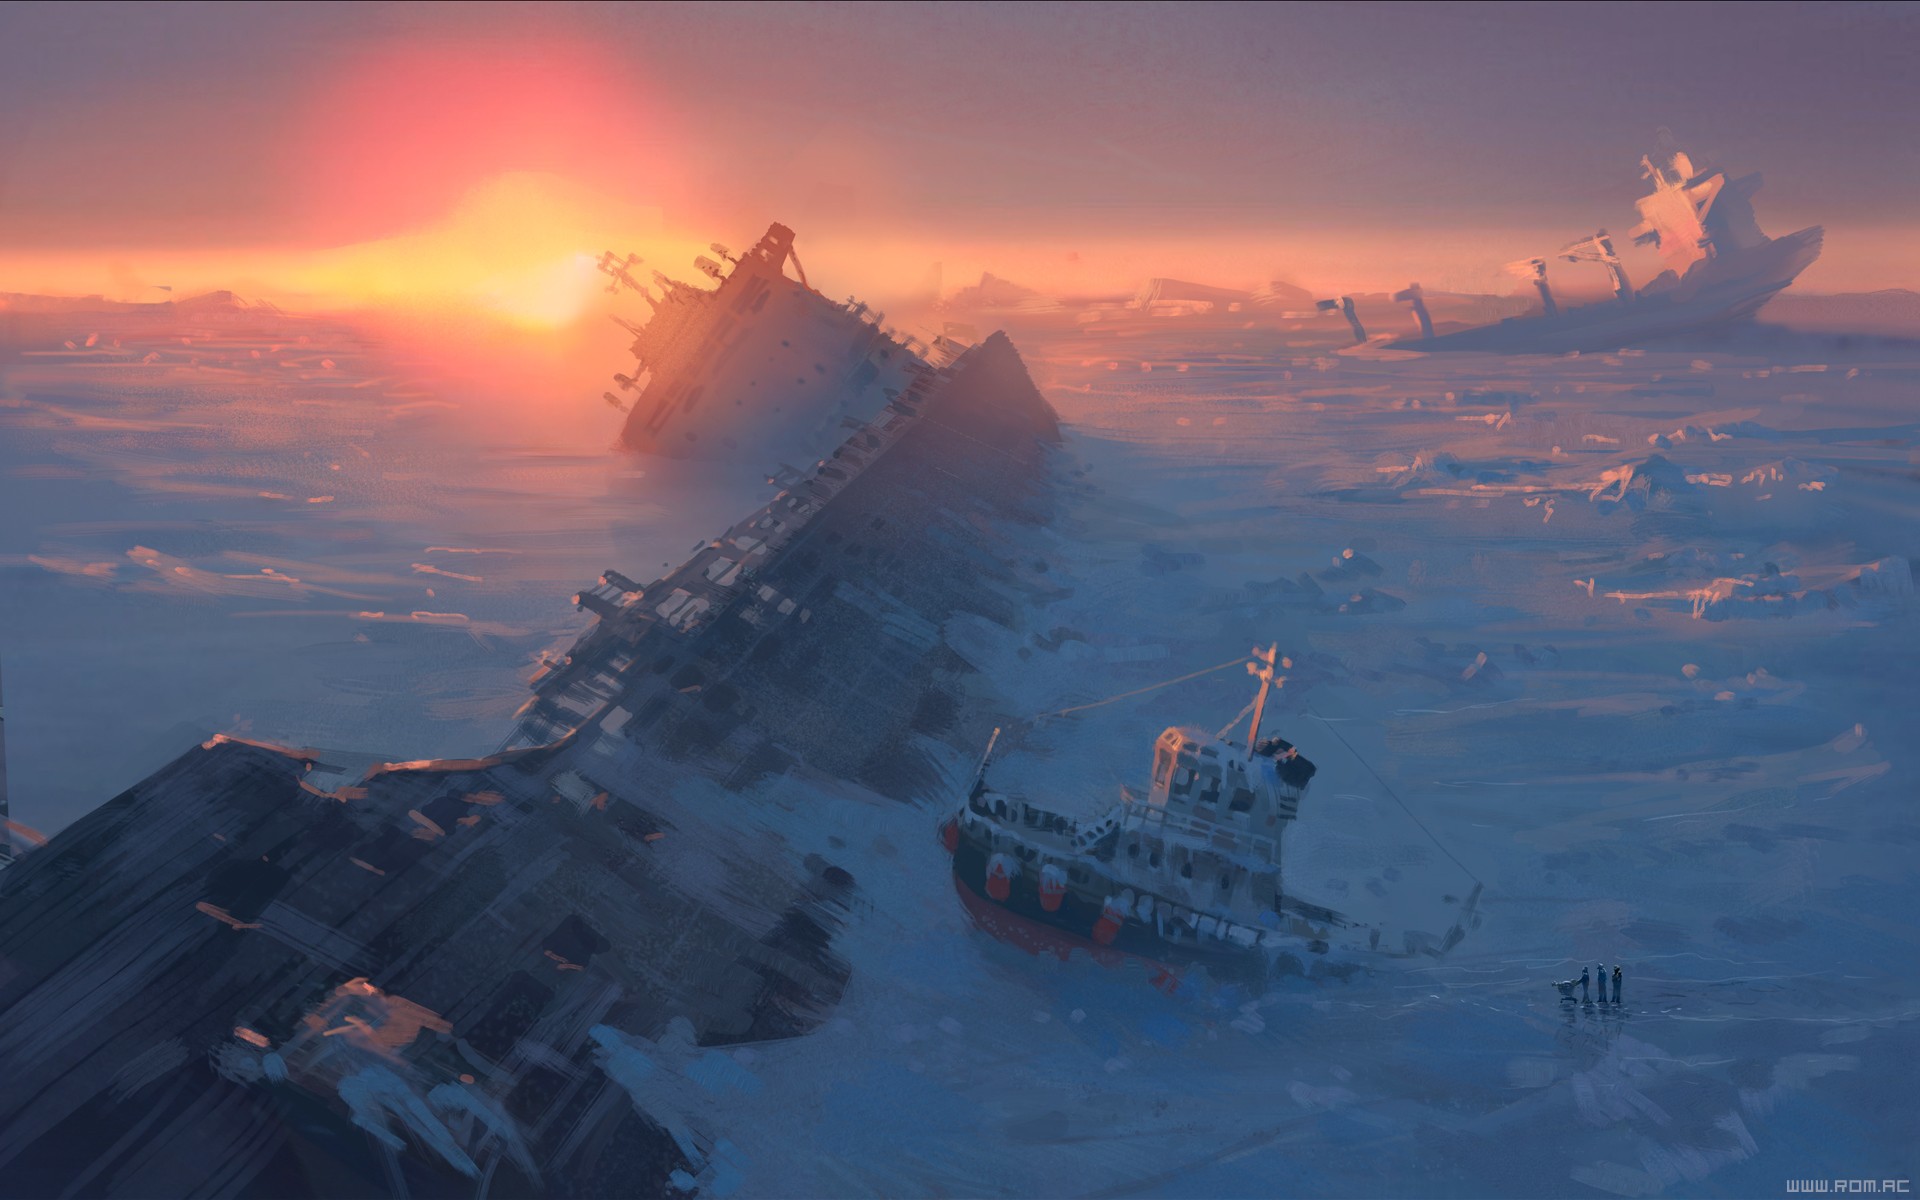 Vitaly S Alexius, Ship, Sunset, Sea, Shipwreck, Frost, Ice, Apocalyptic Wallpaper